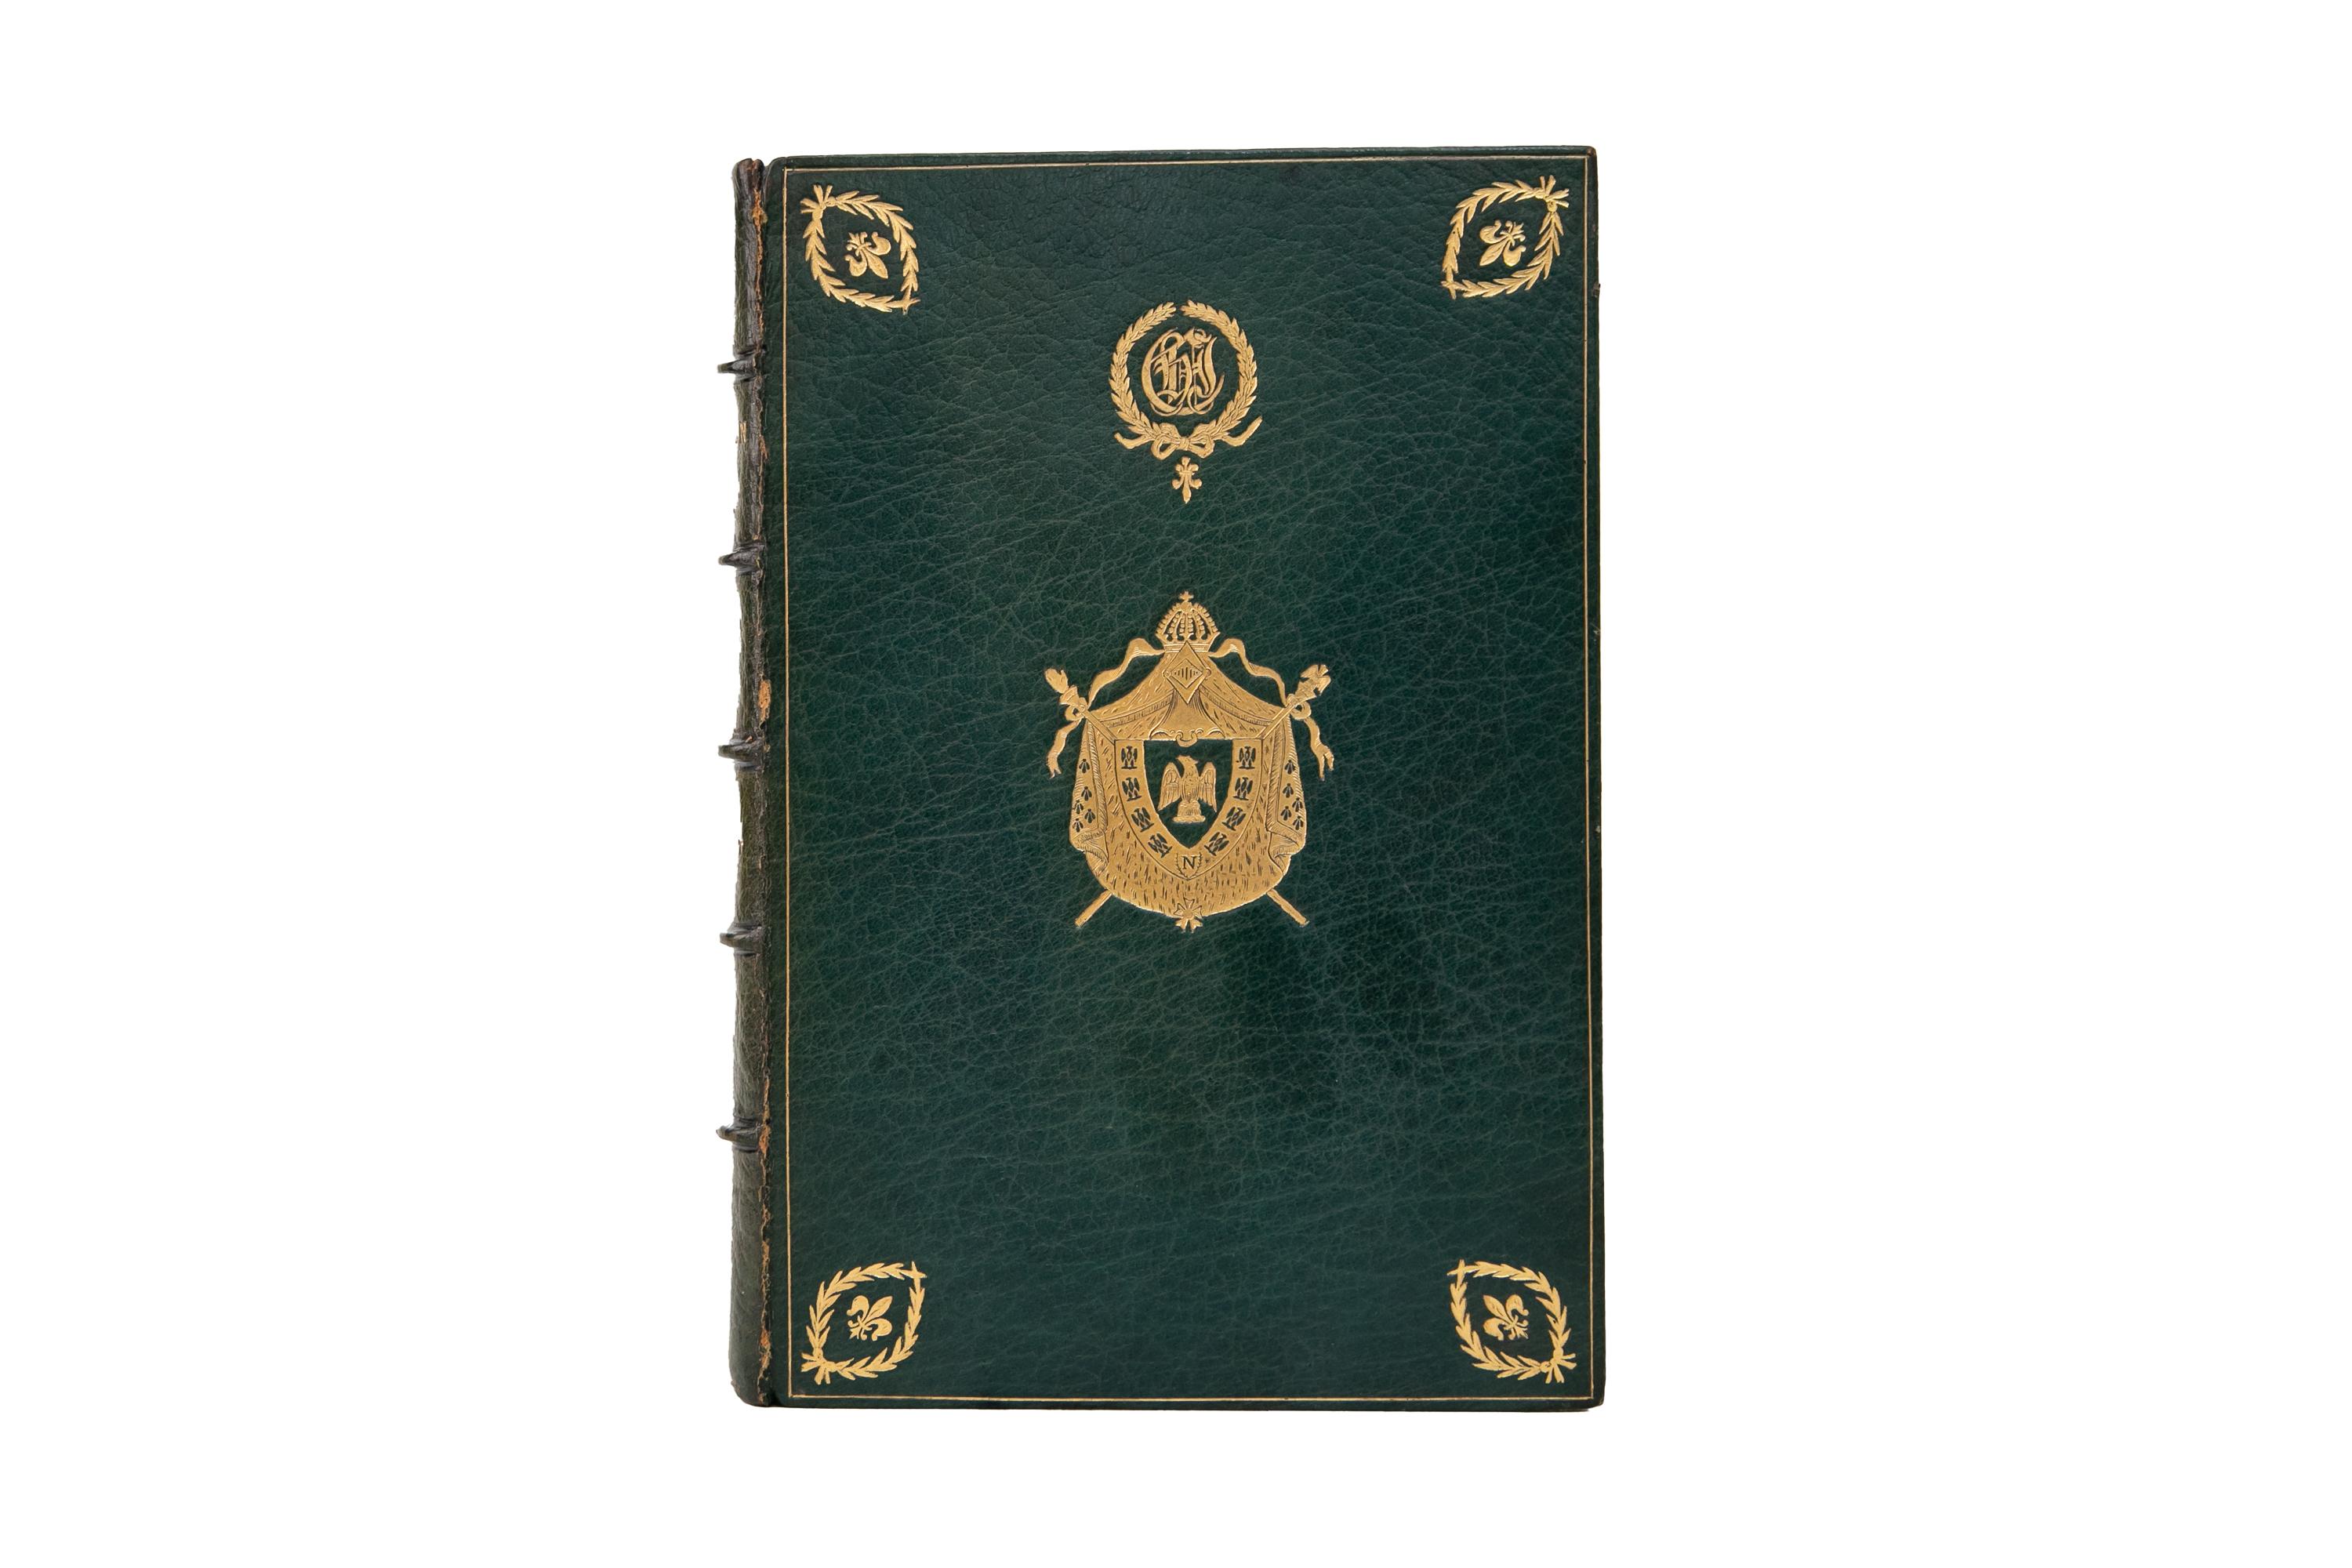 21 Volumes. William Hazlitt, The Life of Napoleon Bonaparte. Édition Definitive. Bound in full green Morocco with gilt-tooled crests on the covers. Raised band spines with gilt-tooled detailing. Top edges gilt, gilt-tooled dentelles, and decorative